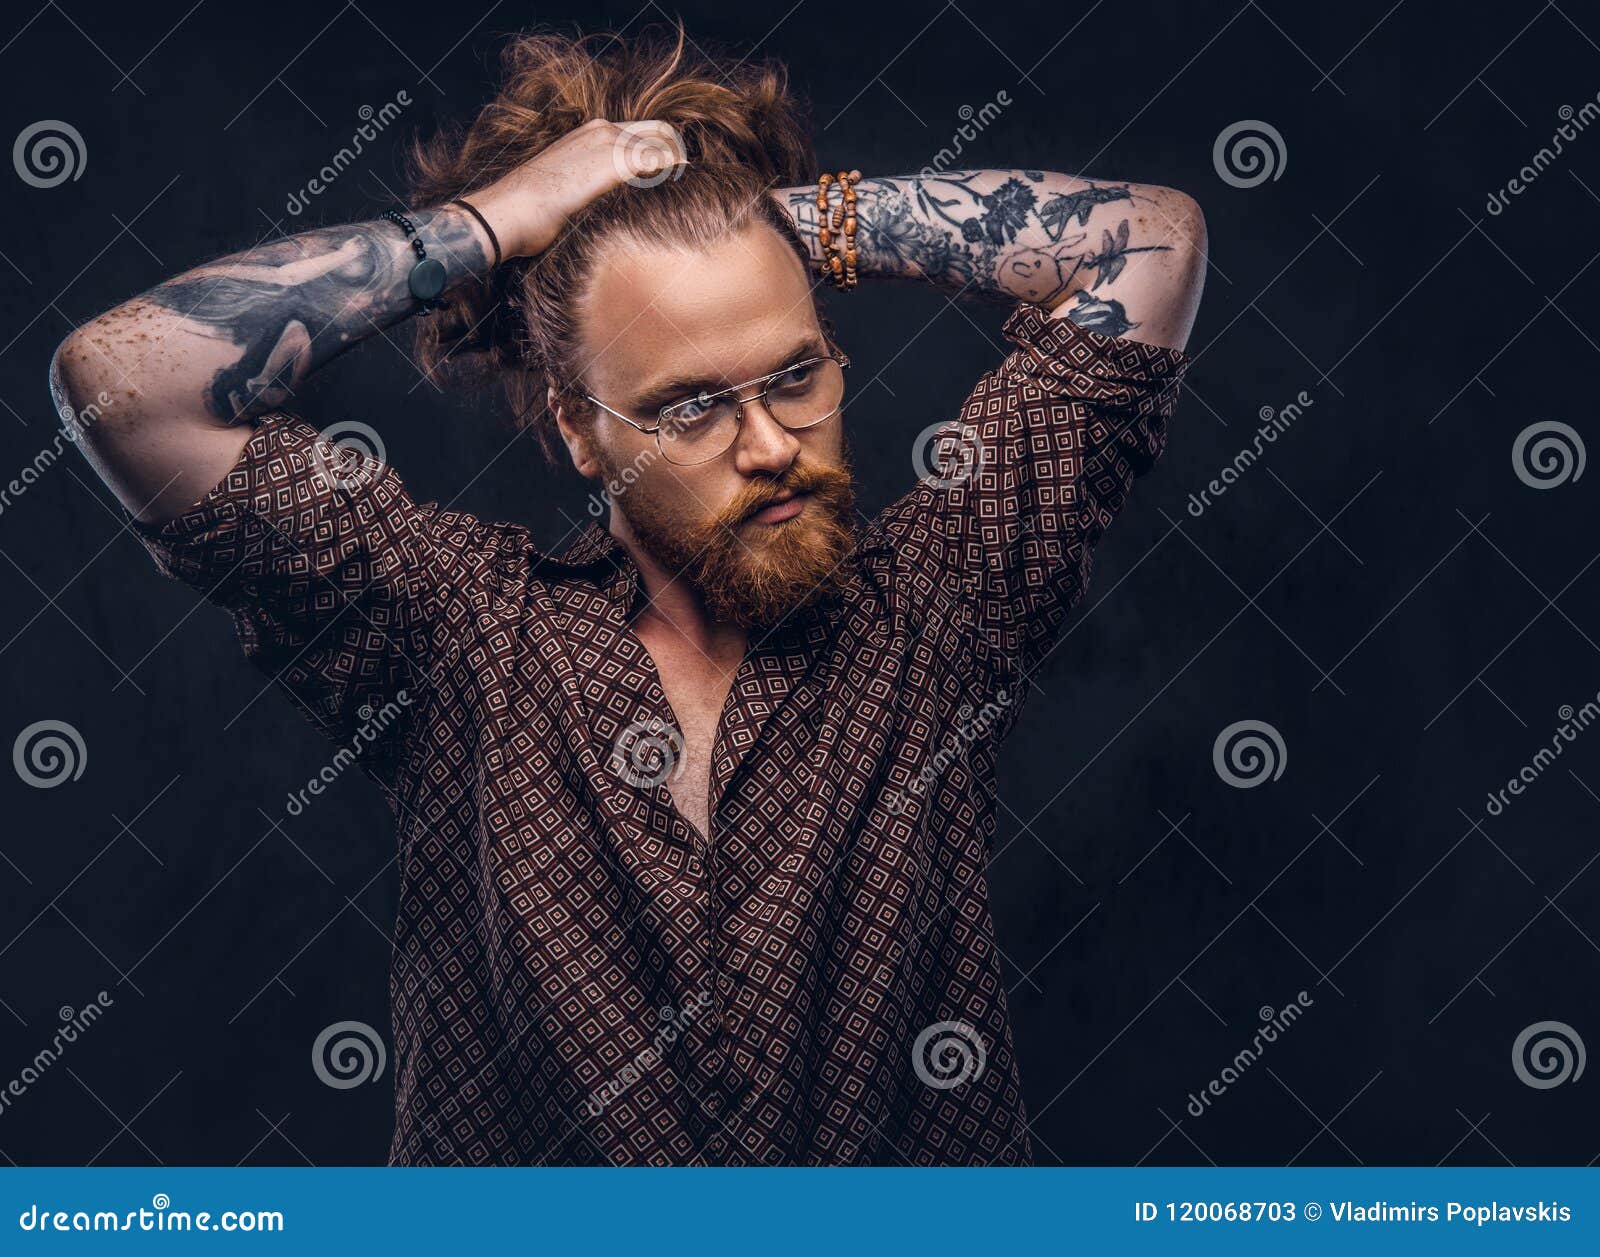 Tattoed Redhead Man Hipster Corrects His Lush Hair Dressed